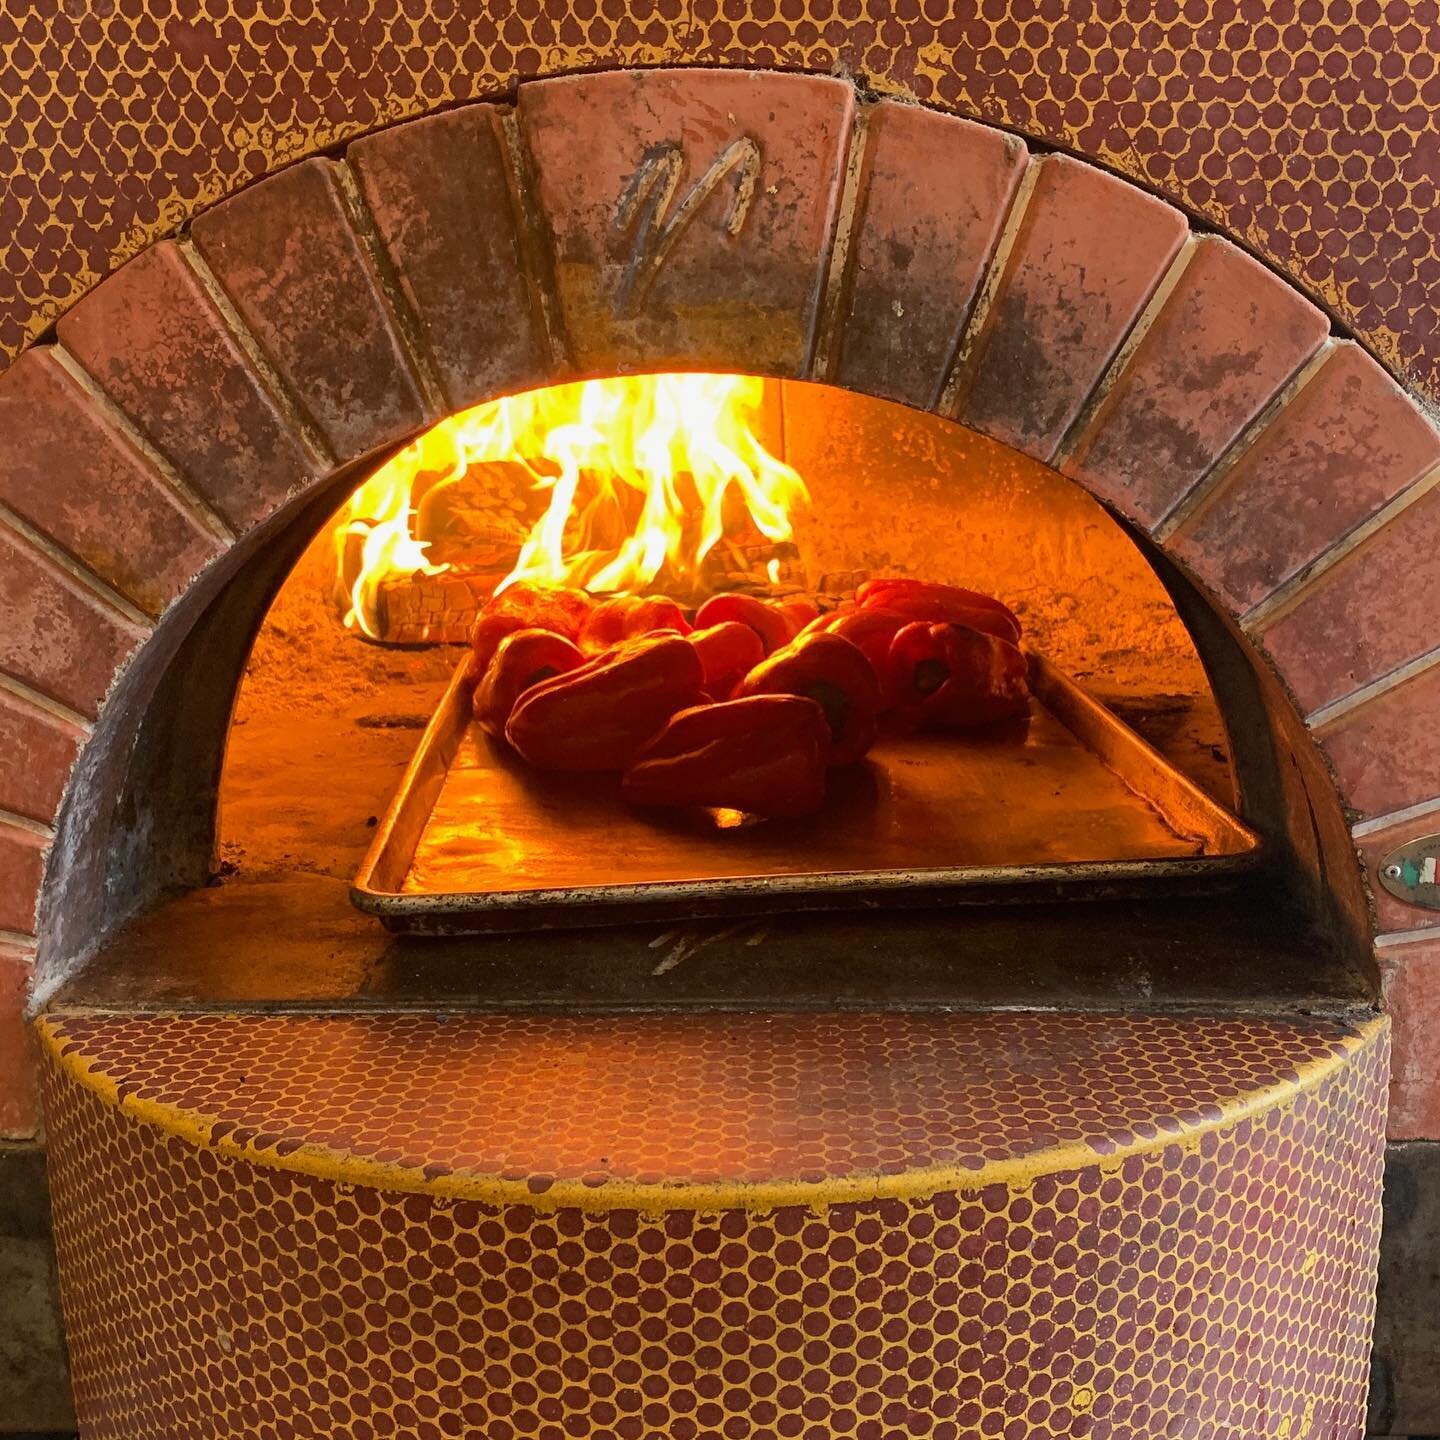 So many unknowns, but one thing we are sure of....we have created a space for our community to gather and be nourished. Our hearth is here for all of you #woodfiredpizza #notjustpizza #boonvilleeats